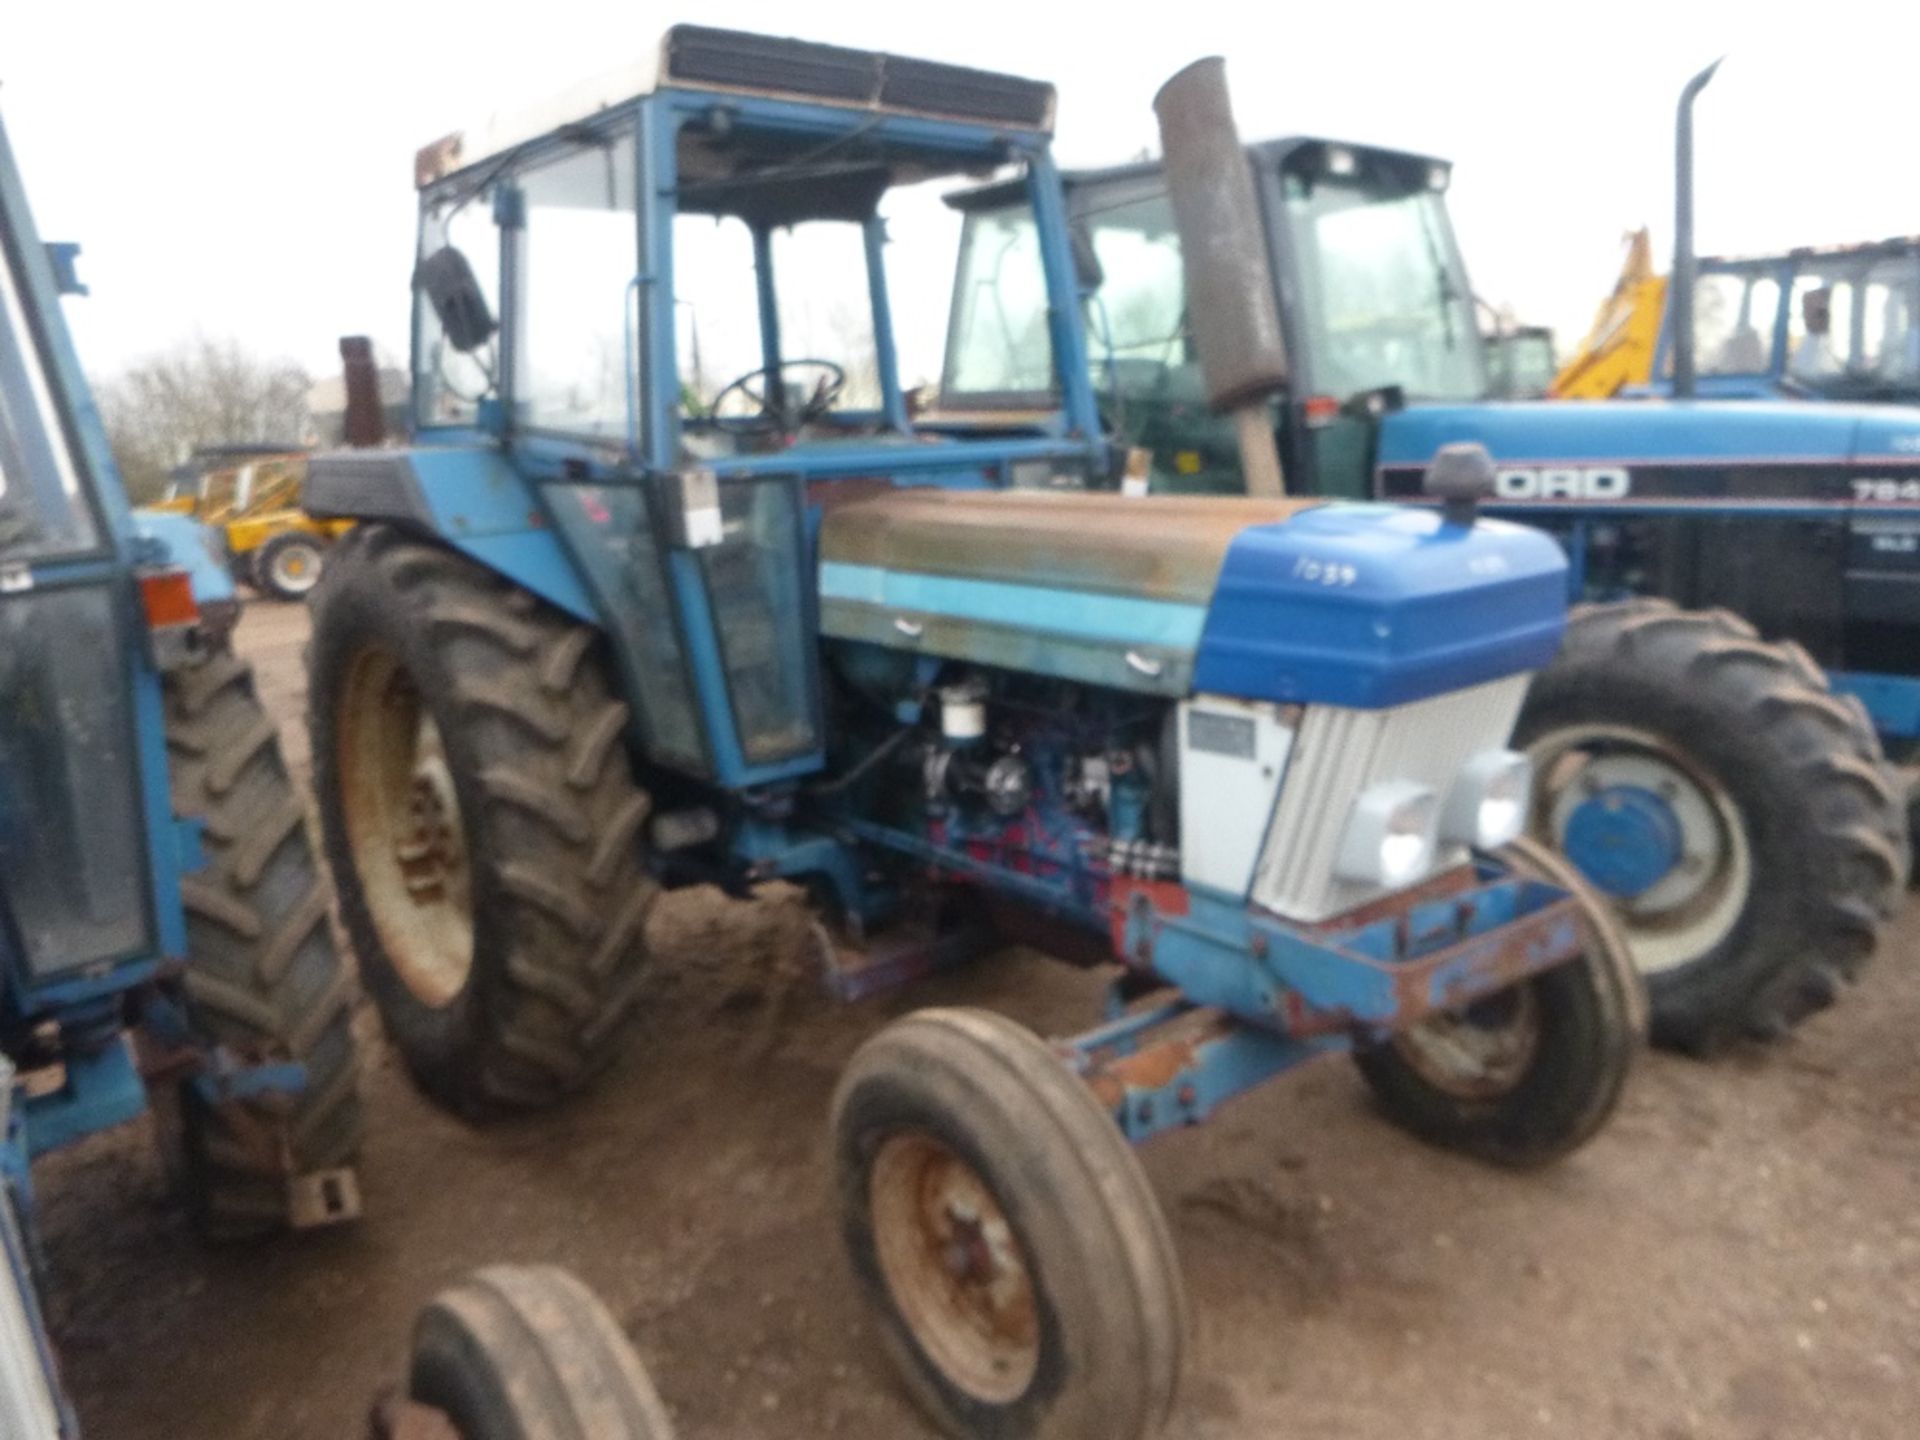 Ford 5610 2wd Tractor with Floor Change Gearbox. Reg. No. B621 UOW Ser. No. BA22021 - Image 3 of 13